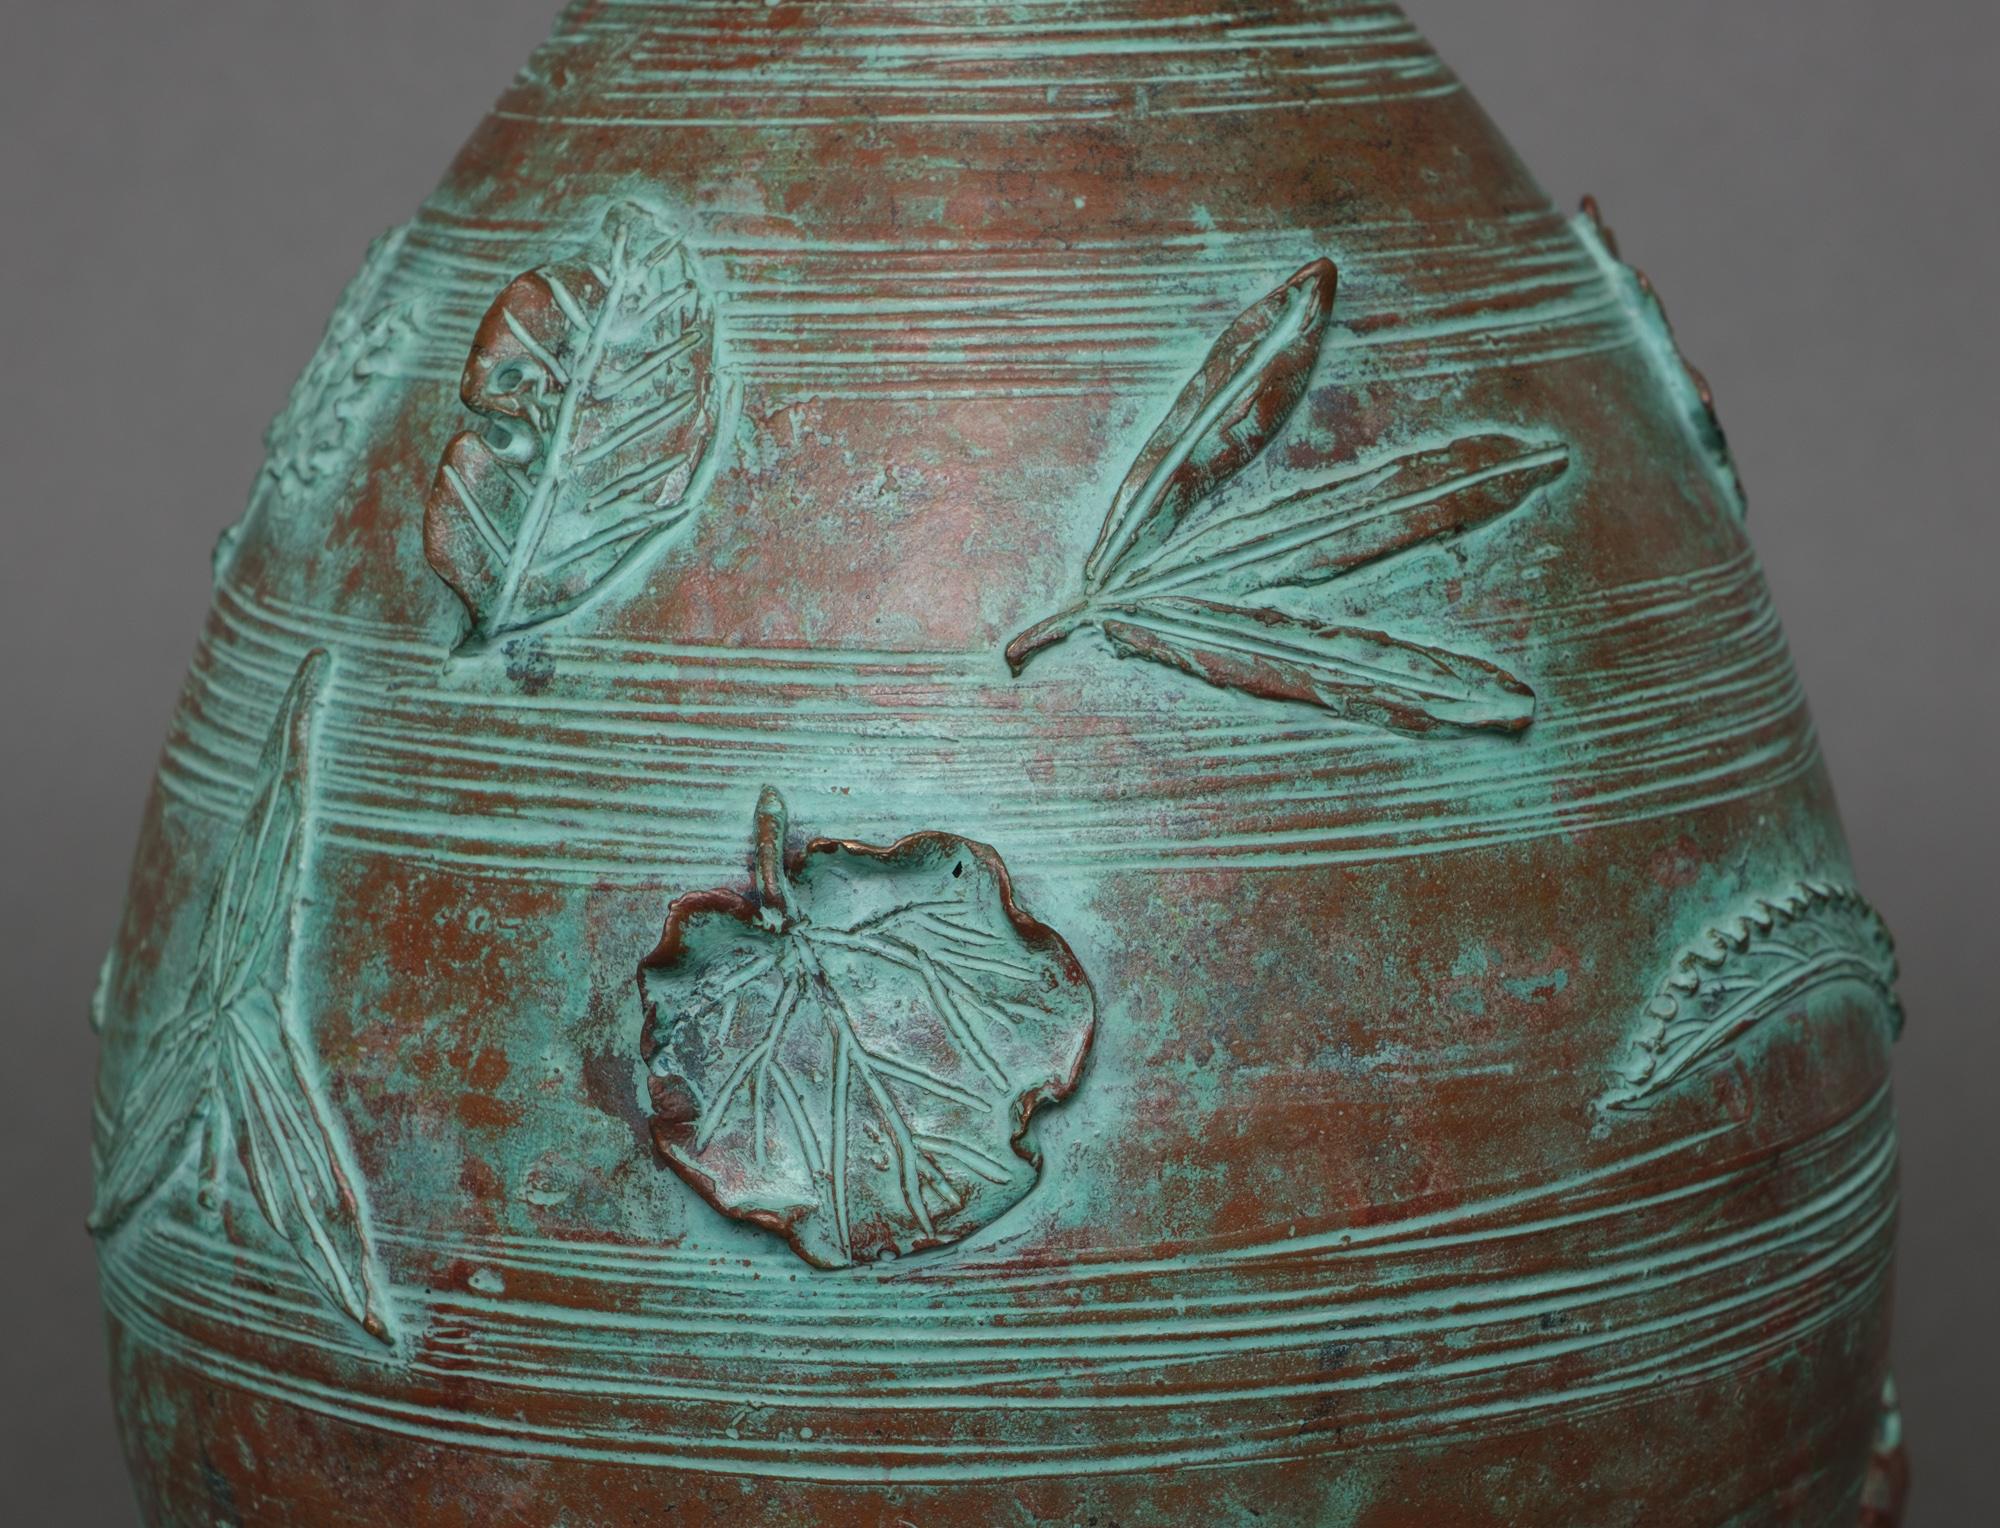 Beautiful bronze ovoid vase with a lovely icy green patina. Decorated with a continuous high relief design of all different kinds of leaves being swept around the vase by heavy gusts of wind. 

The lower edge signed and sealed by the artist Hirai